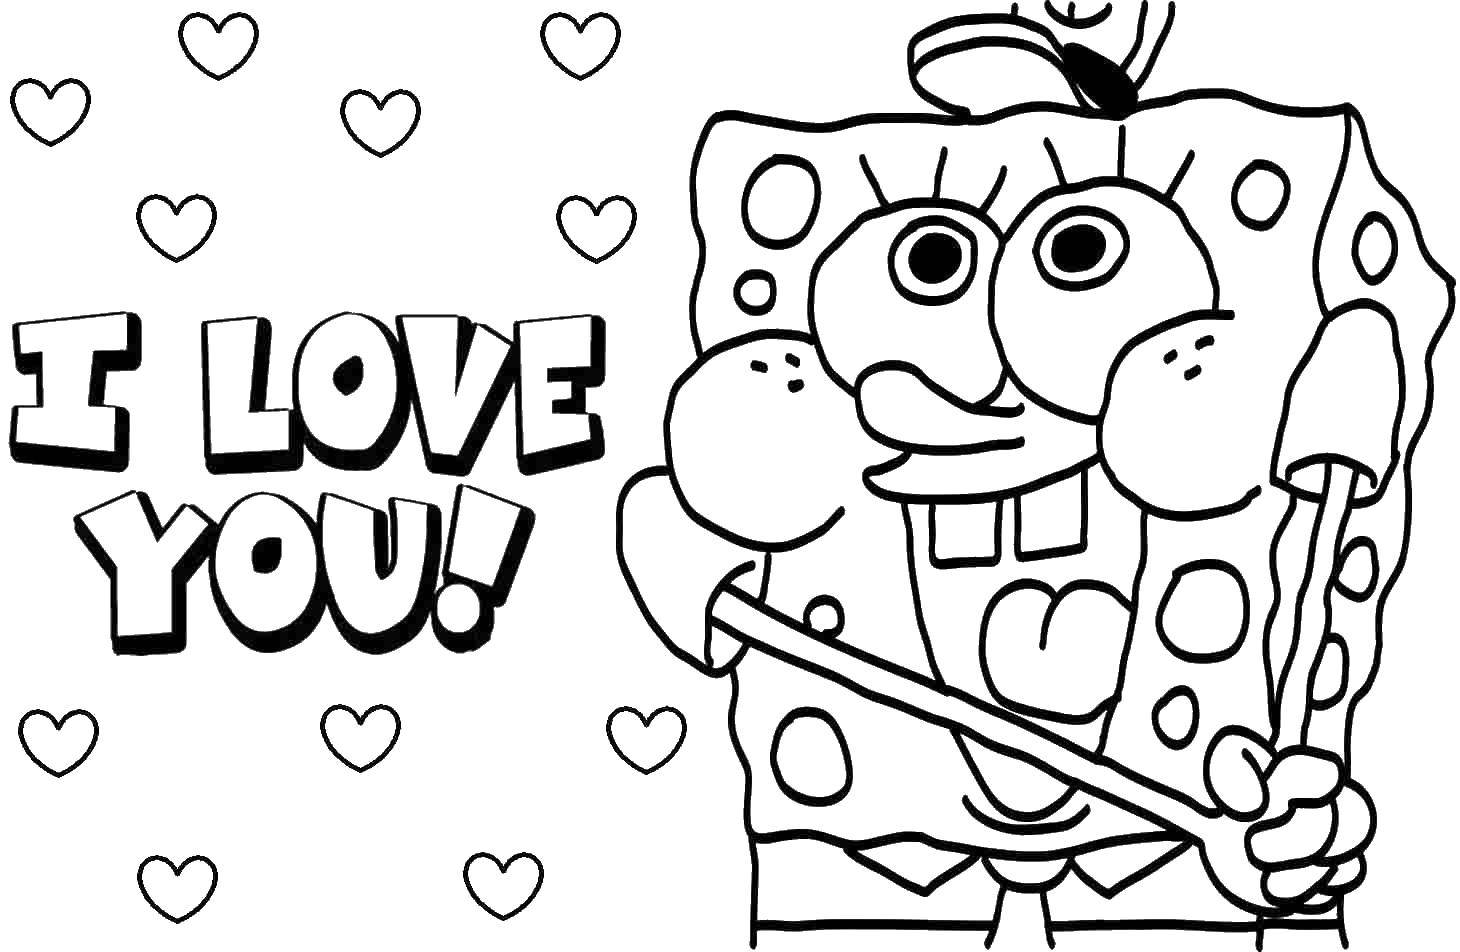 Coloring I love you!. Category Valentines day. Tags:  Valentines day, love, heart.